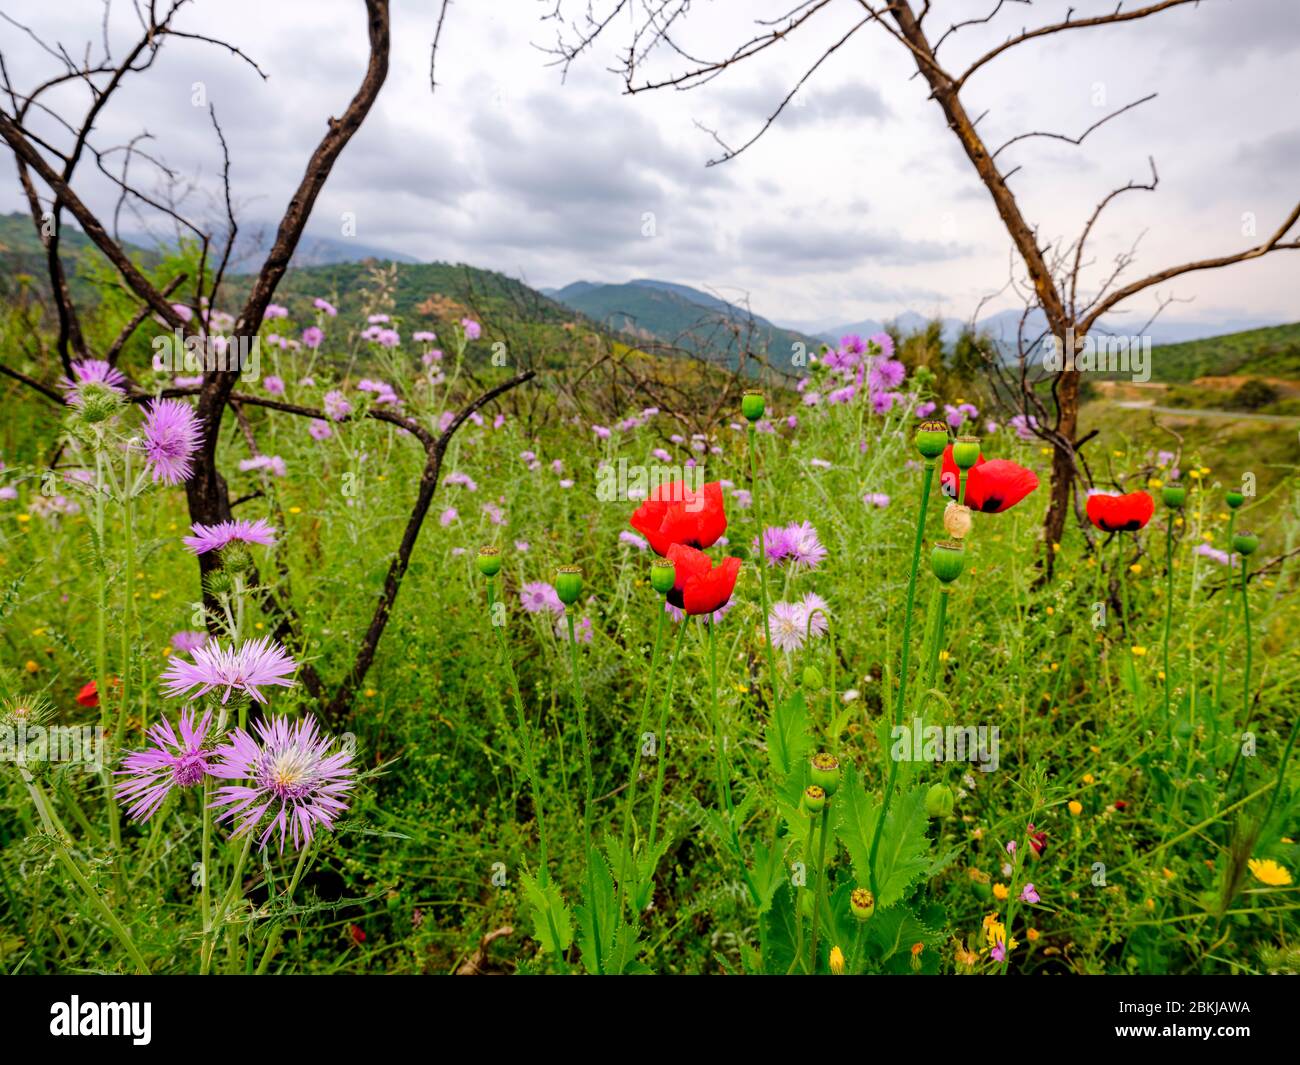 Beautiful meadow with wild flowers in springtime in the Sardinian region of Ogliastra. Mountain landscape in the background. Stock Photo